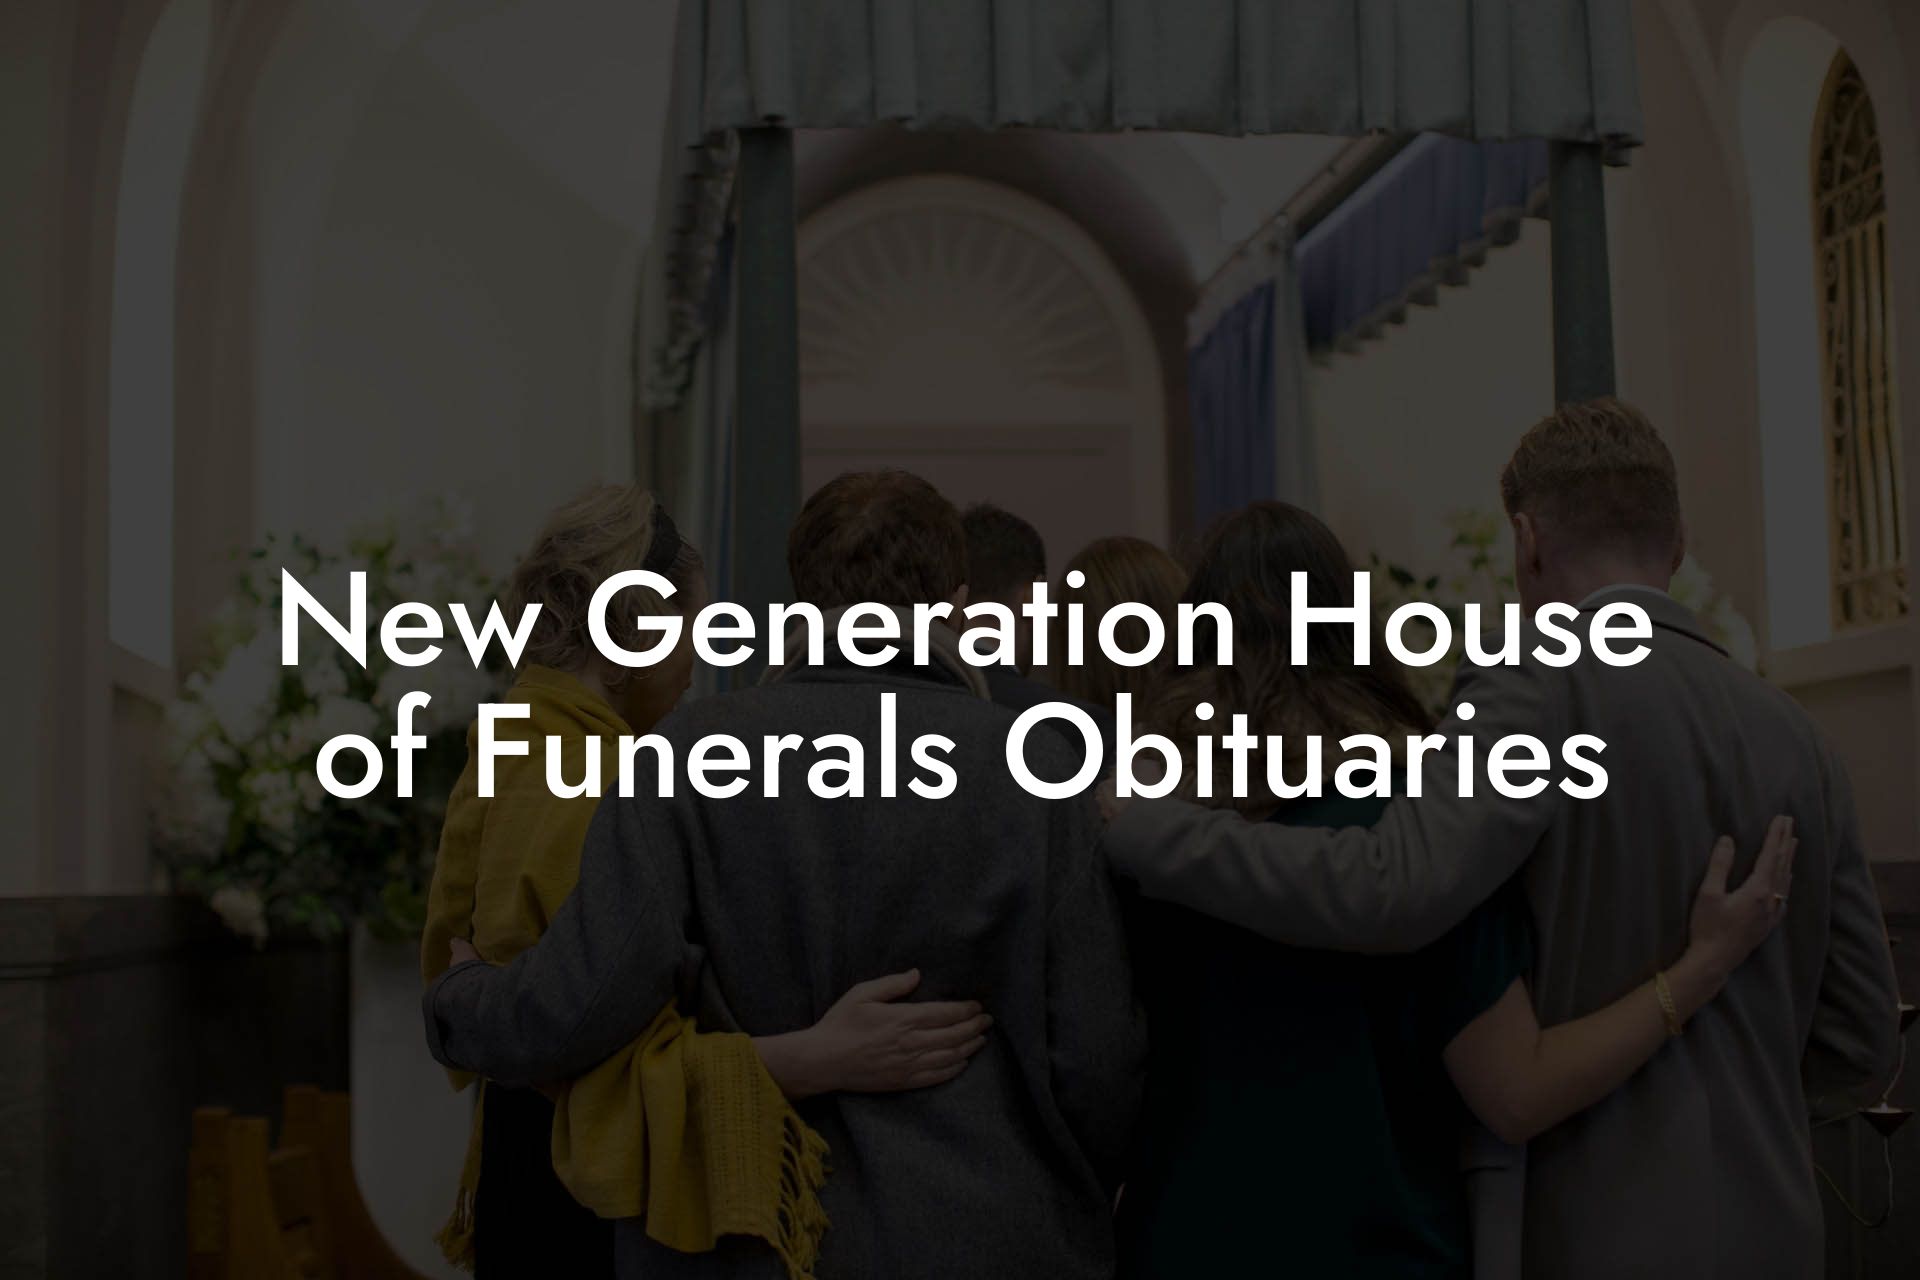 New Generation House of Funerals Obituaries